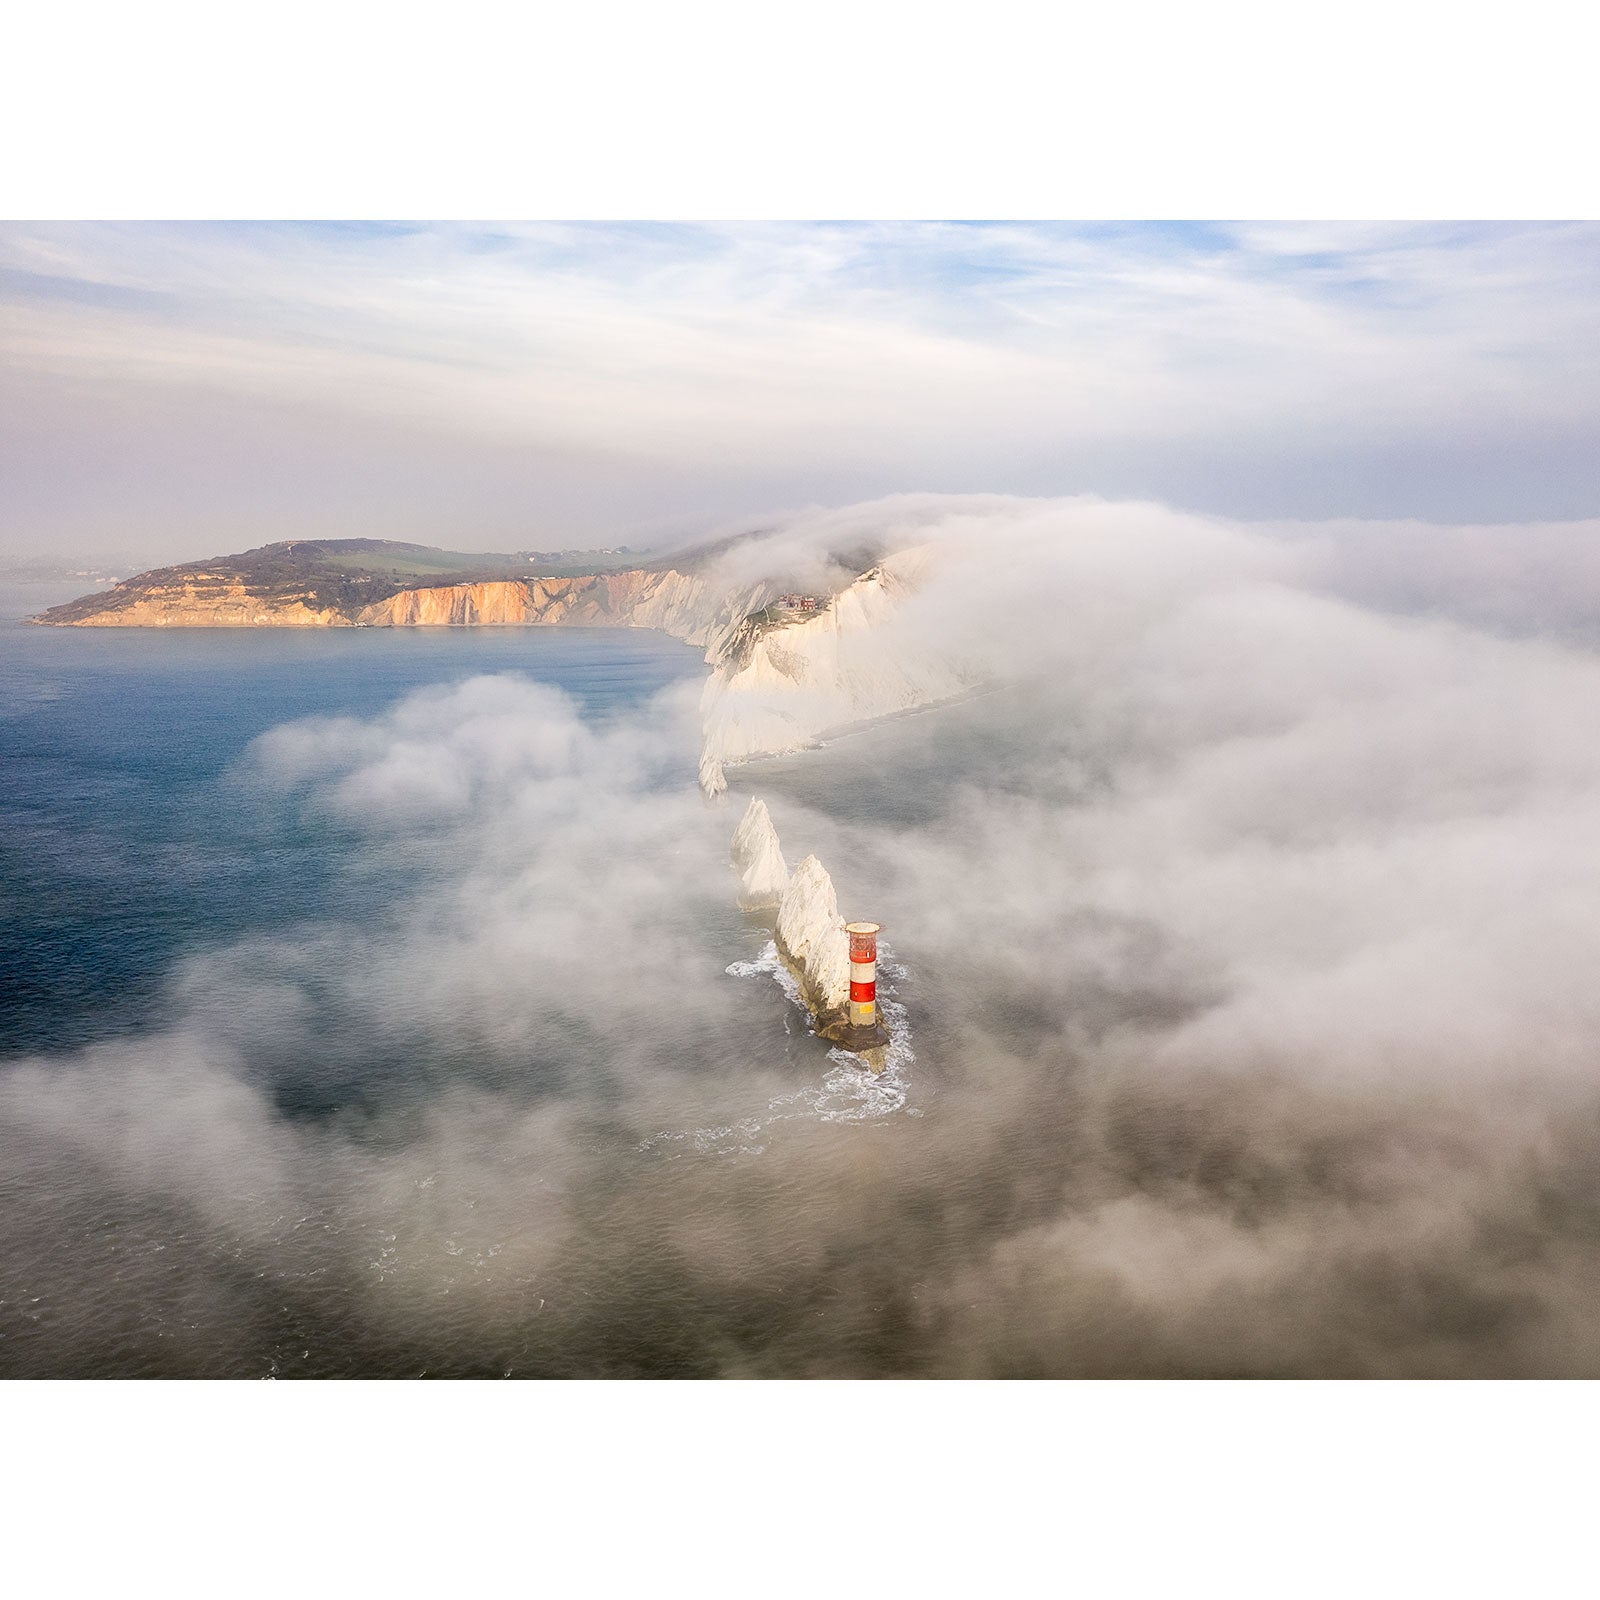 Fog over The Needles engulfed by sea fog with towering cliffs on the Isle of Wight in the background. Shot by Available Light Photography.